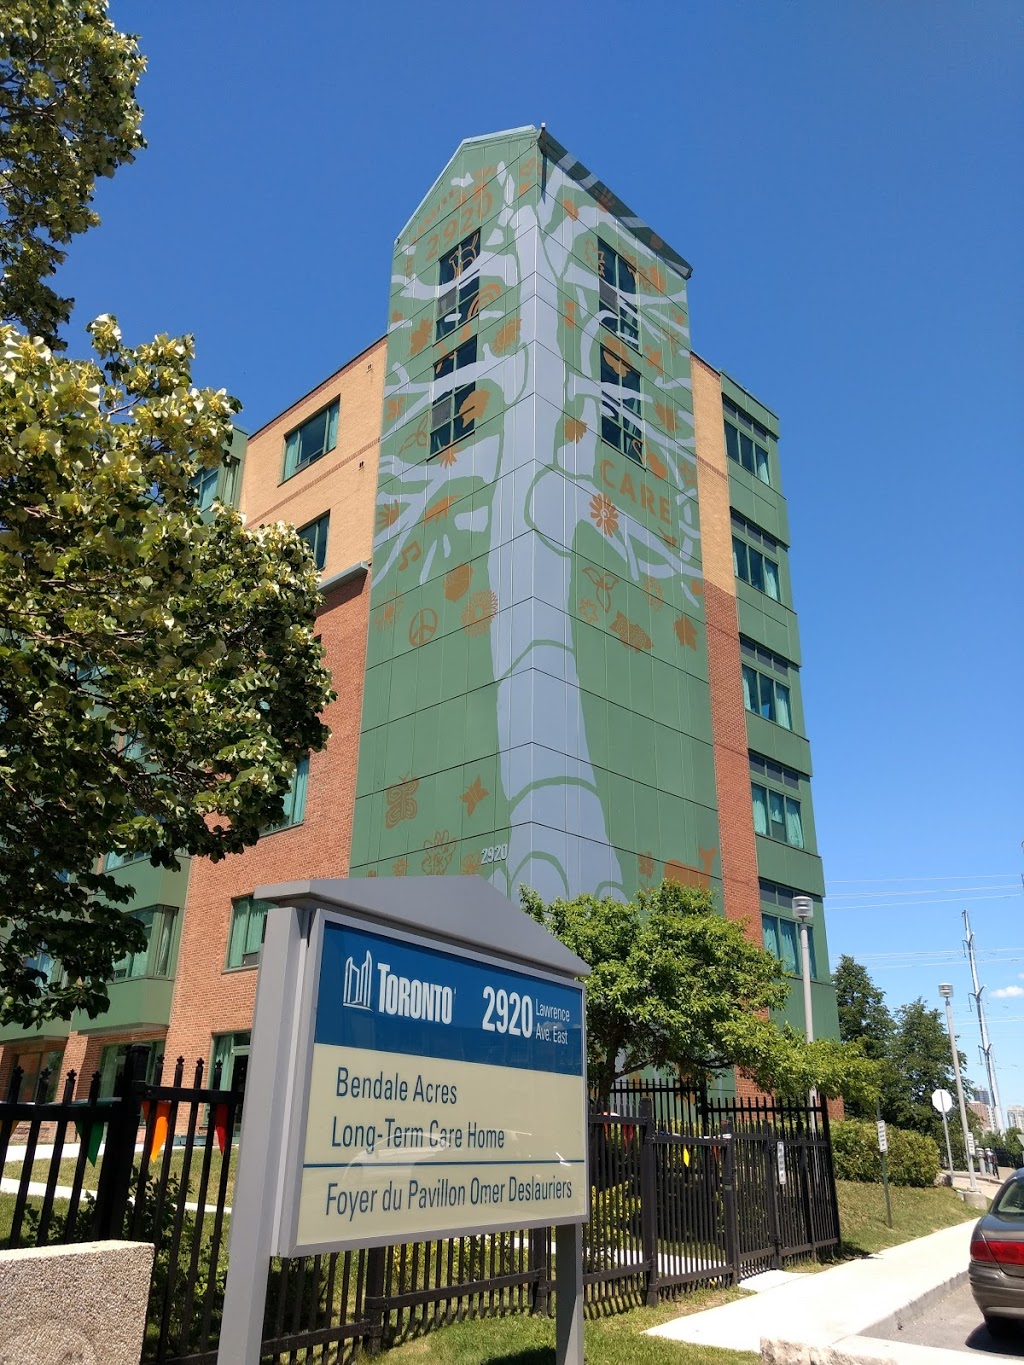 Scarborough Health Network - General hospital | hospital | 3050 Lawrence Ave E, Scarborough, ON M1P 2V5, Canada | 4164382911 OR +1 416-438-2911